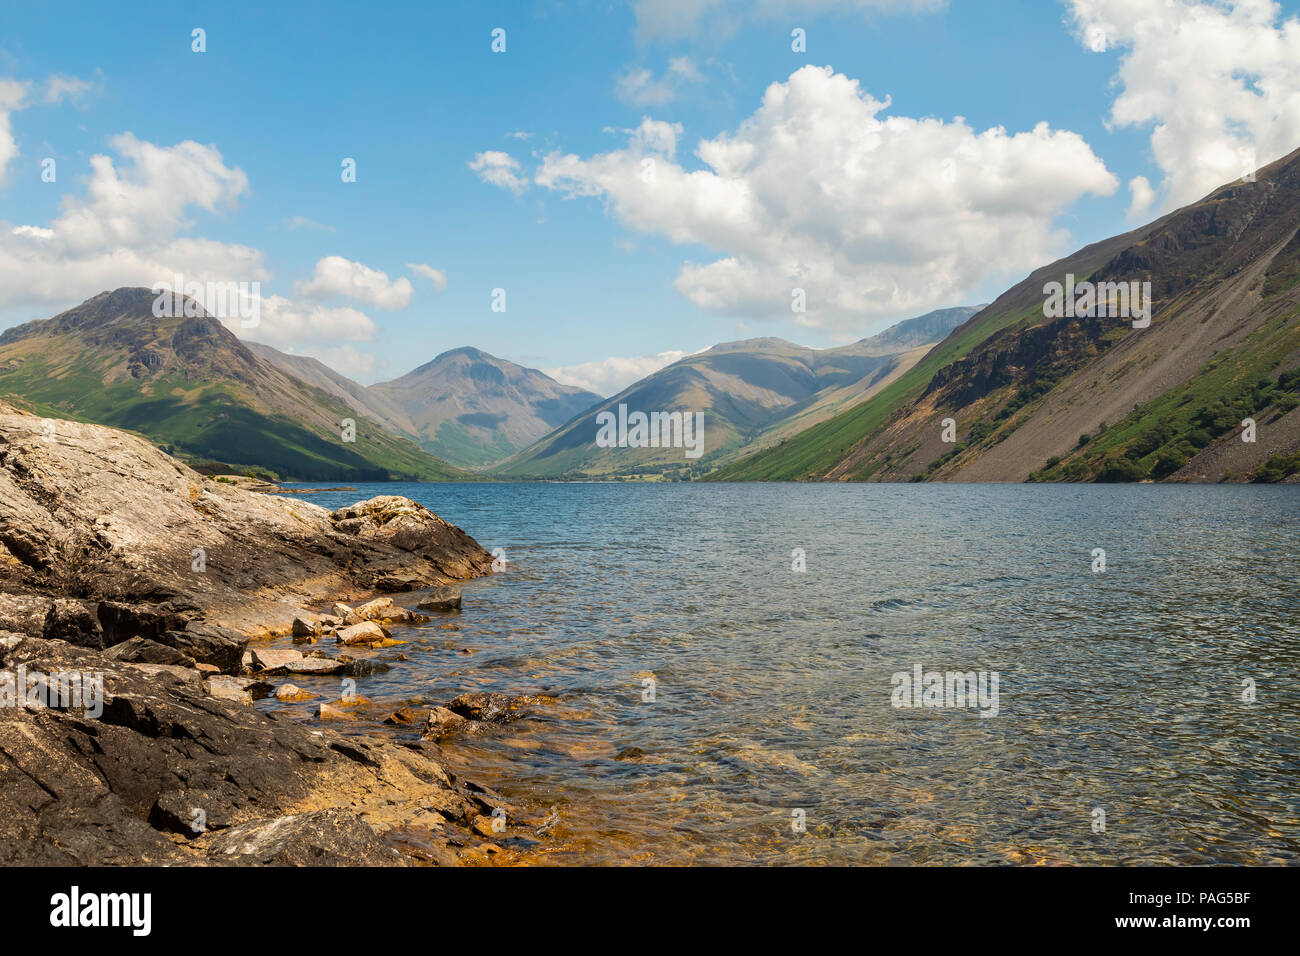 An image of a beautiful mountain lake shot in the Lake District, Cumbria, England, UK Stock Photo